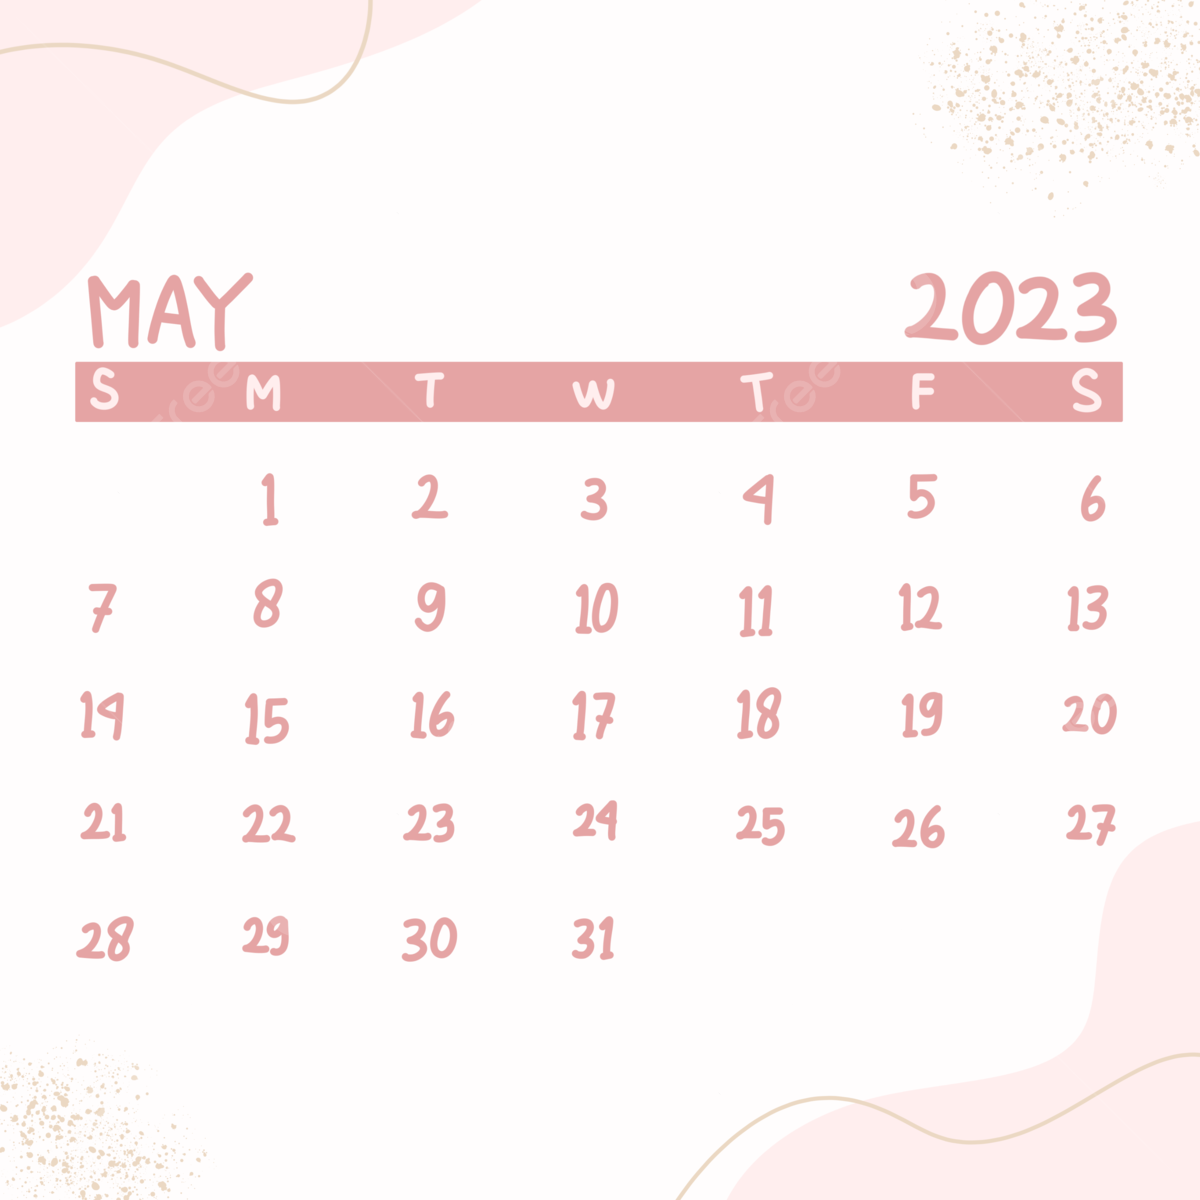  2023 Kalender Hintergrundbild 1200x1200. Calendar May With Aesthetic Background, Calendar, Aesthetic Background Image And Wallpaper for Free Download